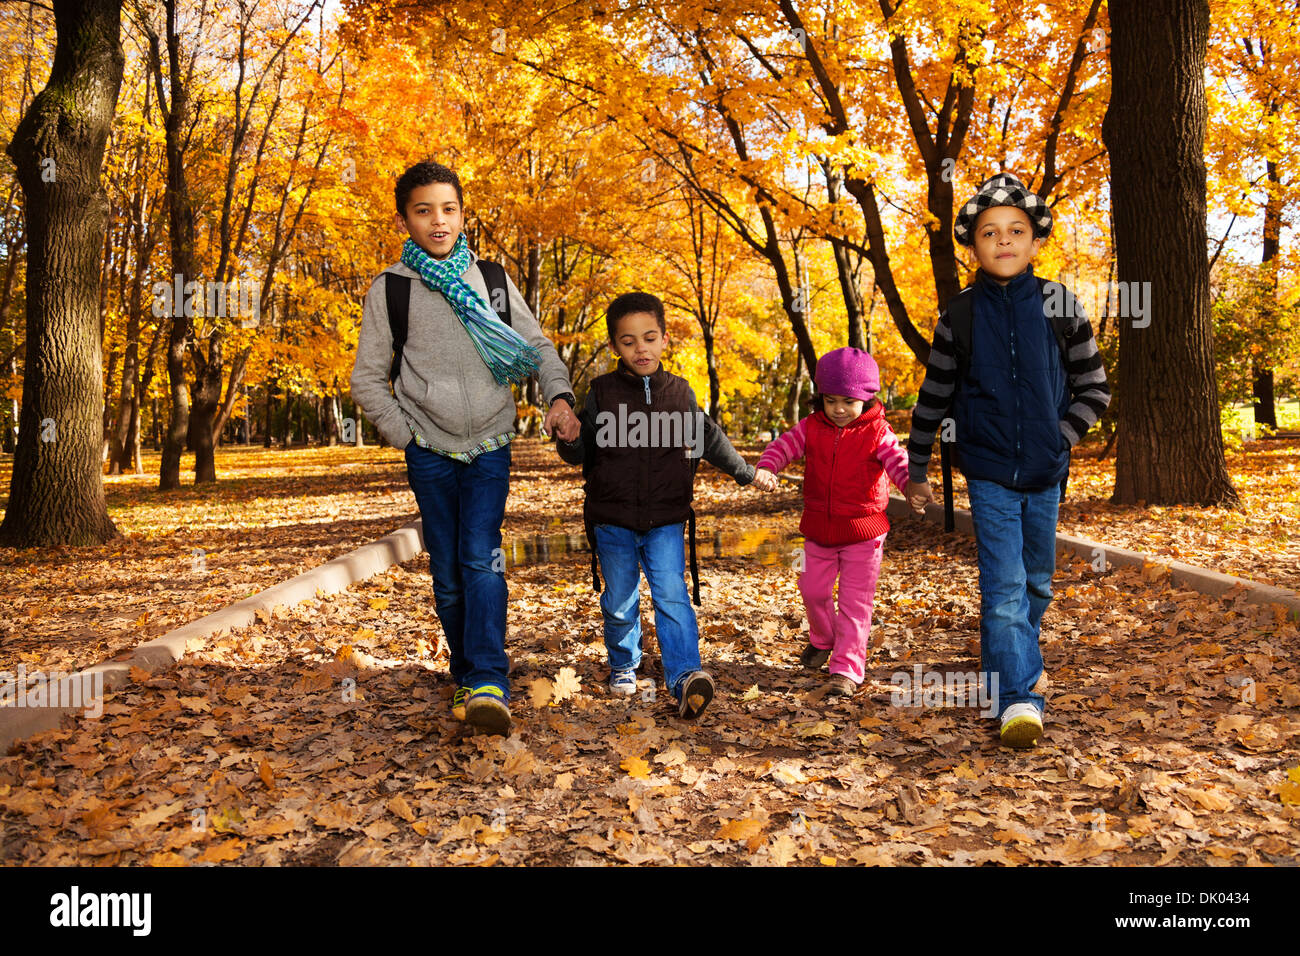 Group of four black boys and girl, happy brothers and sister 3-10 years old going together holding hands in the park wearing backpacks and autumn clothes in oak park with orange leaves Stock Photo